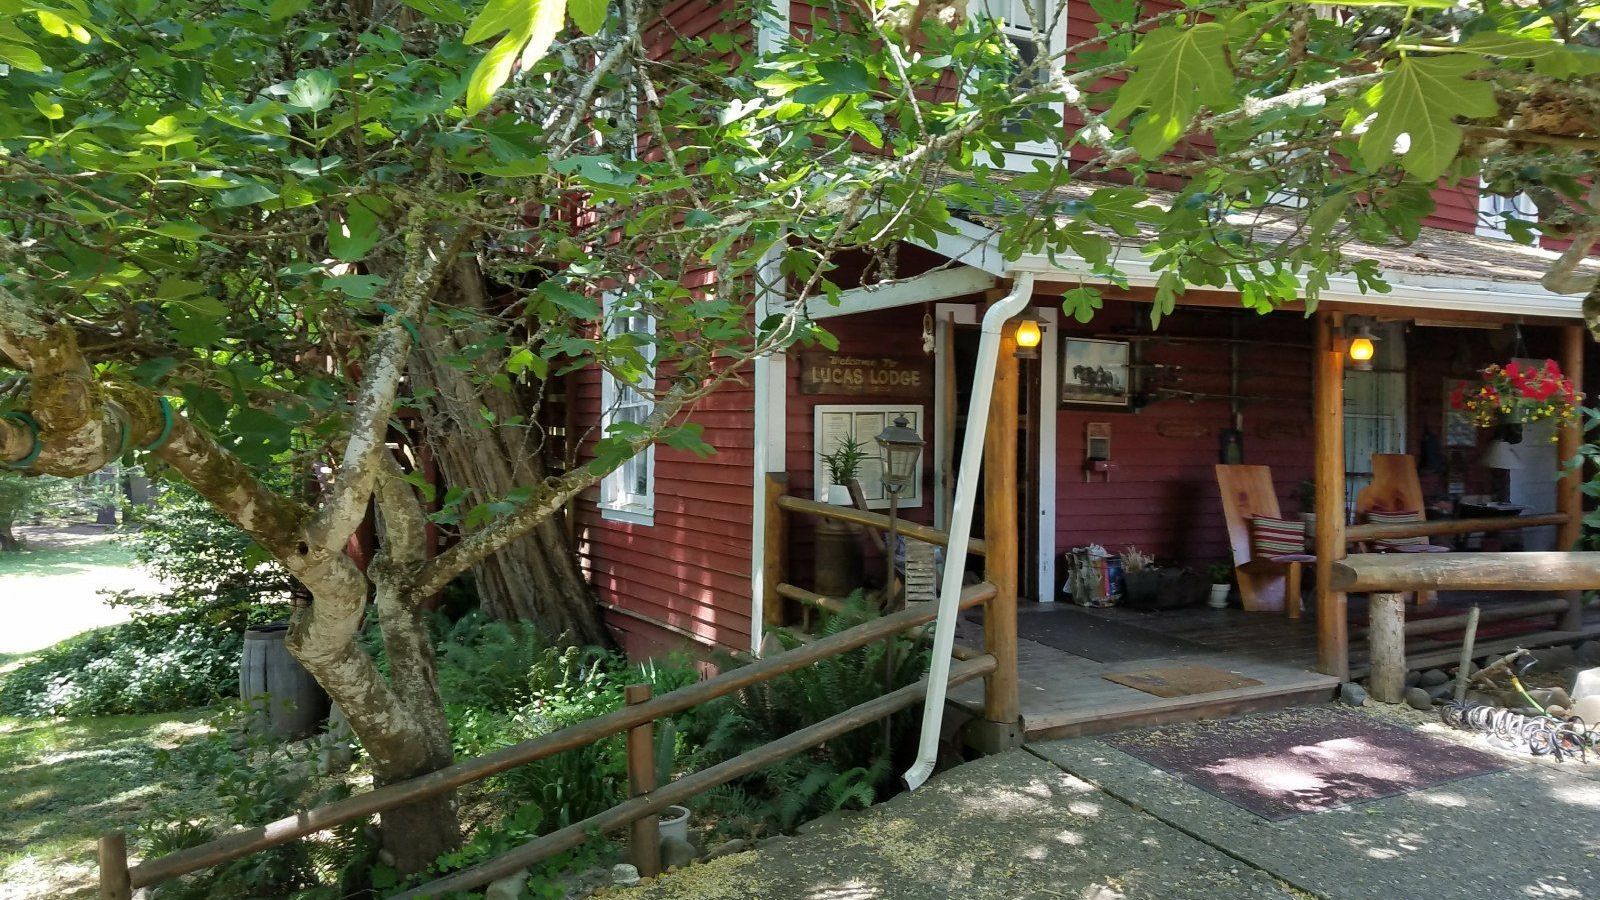 exterior of the Lucas Lodge showing the front porch area